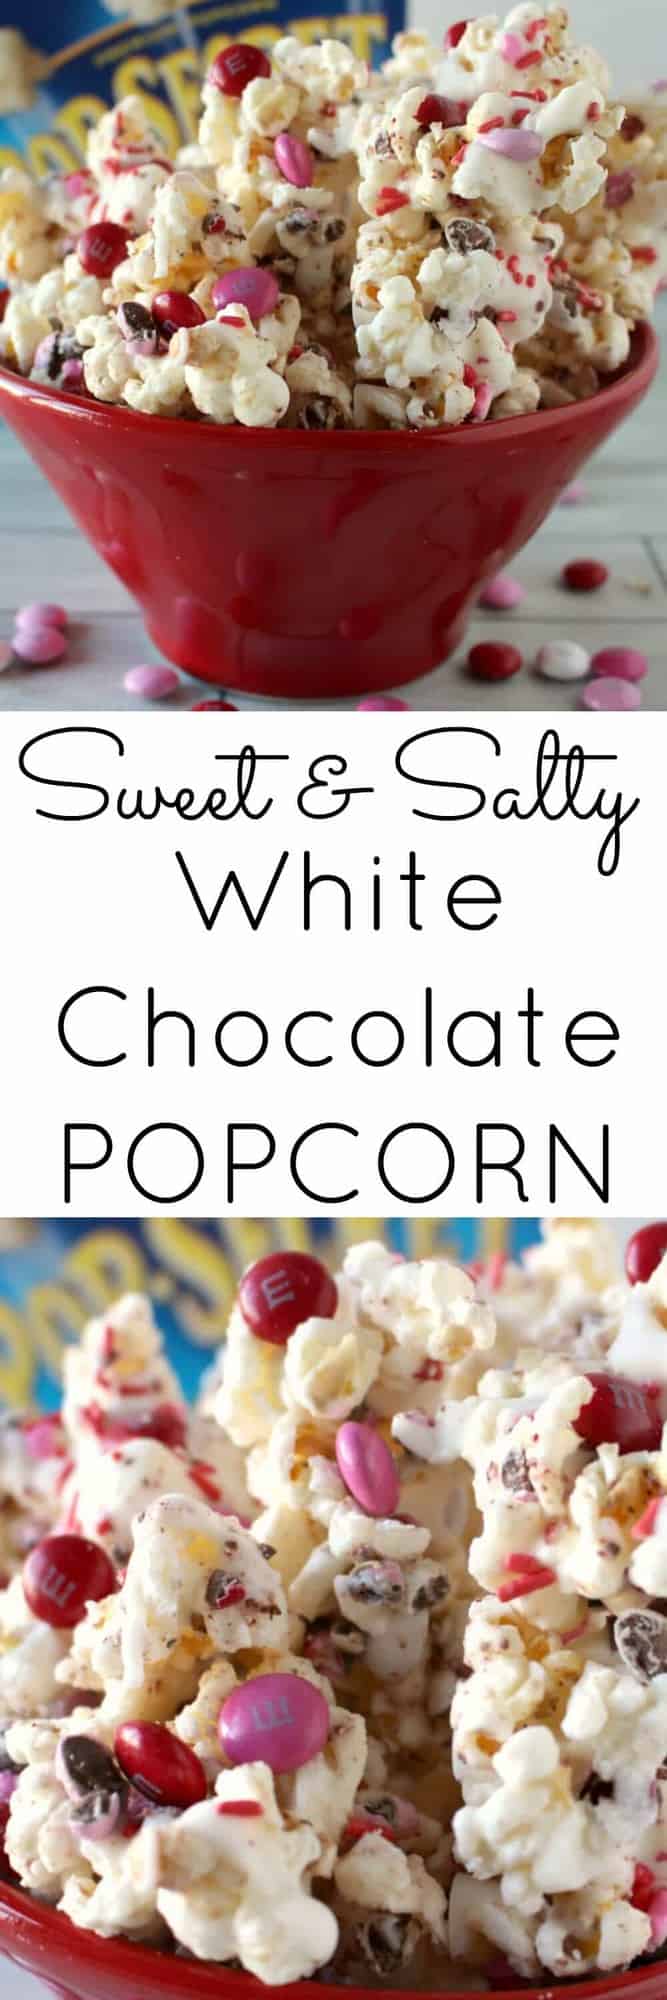 Sweet and Salty White Chocolate Popcorn with m&m's - only takes 15 minutes to make